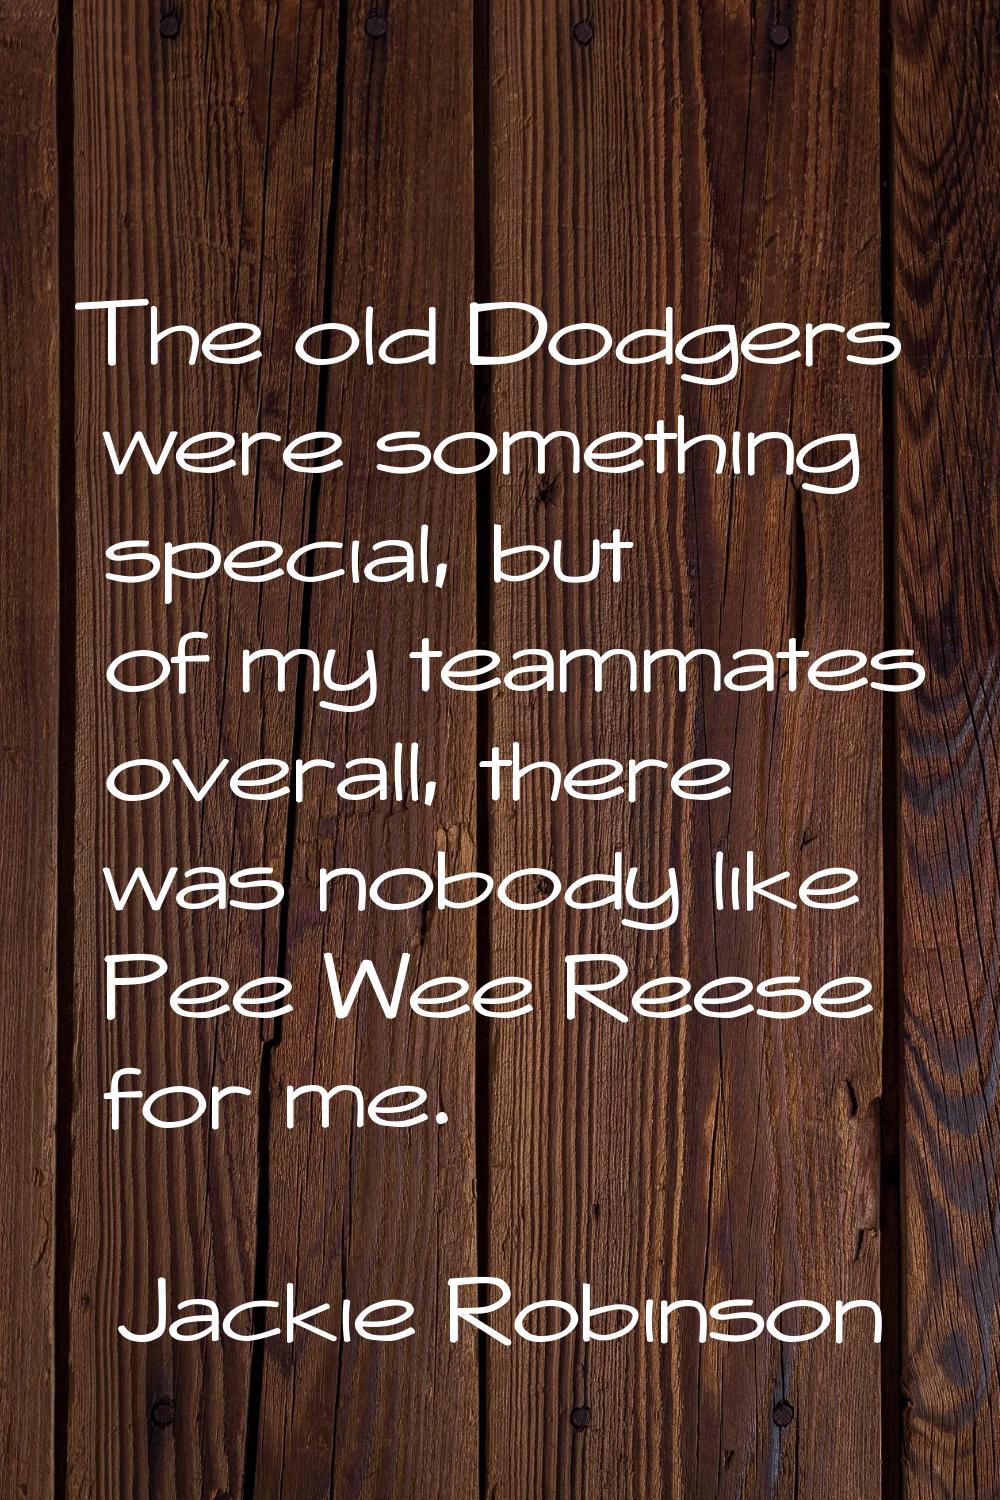 The old Dodgers were something special, but of my teammates overall, there was nobody like Pee Wee 